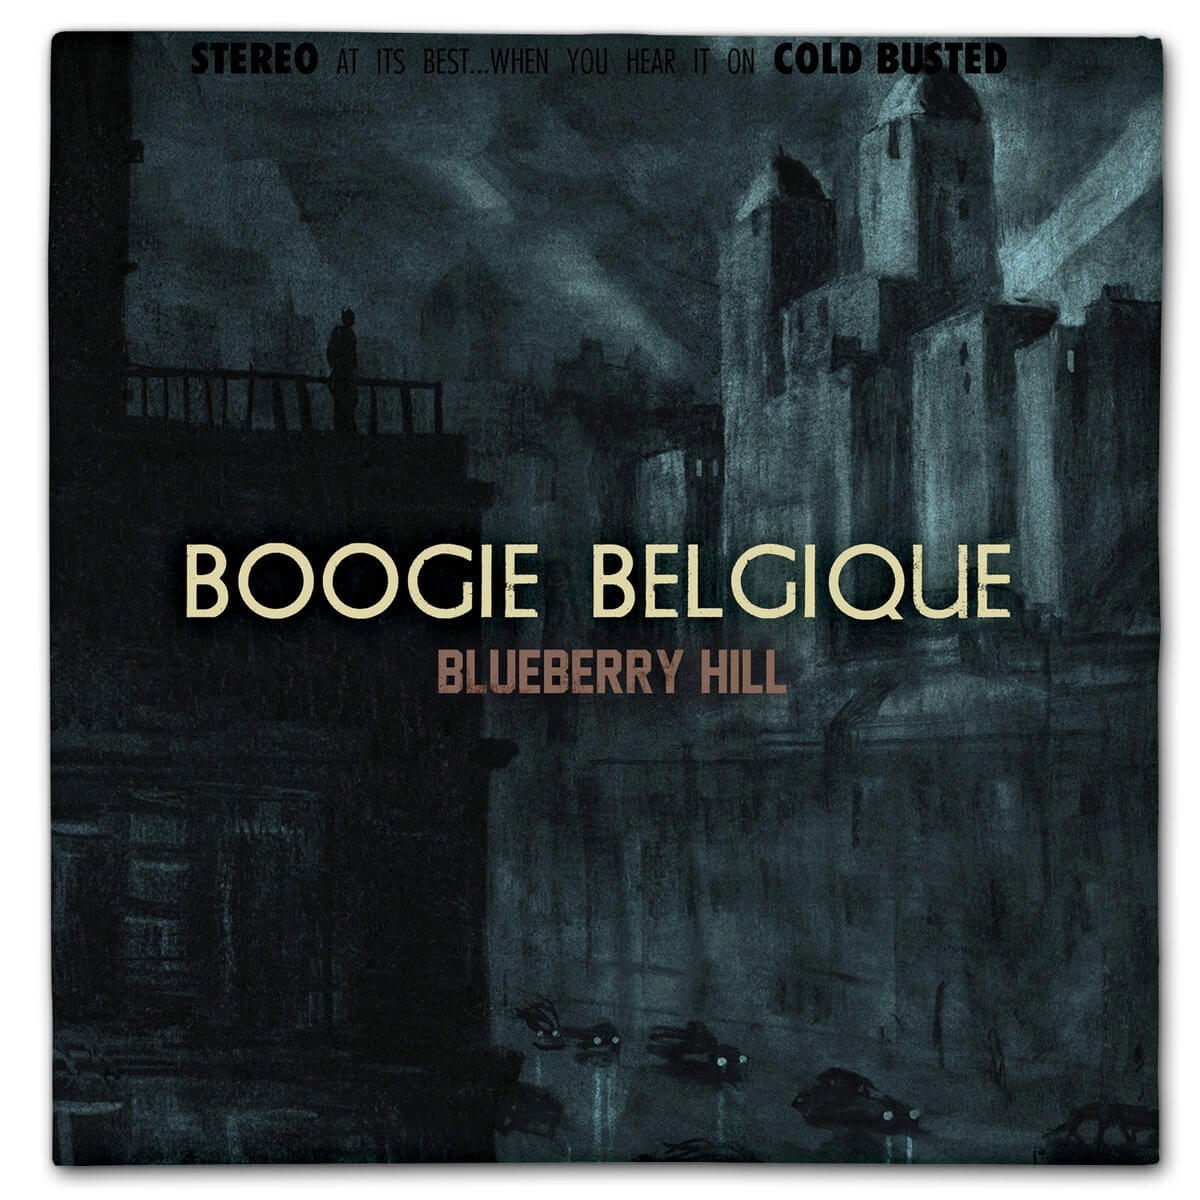 Boogie Belgique - Blueberry Hill (Remastered) - Crowdfunded Limited Edition 12 Inch Vinyl - Cold Busted